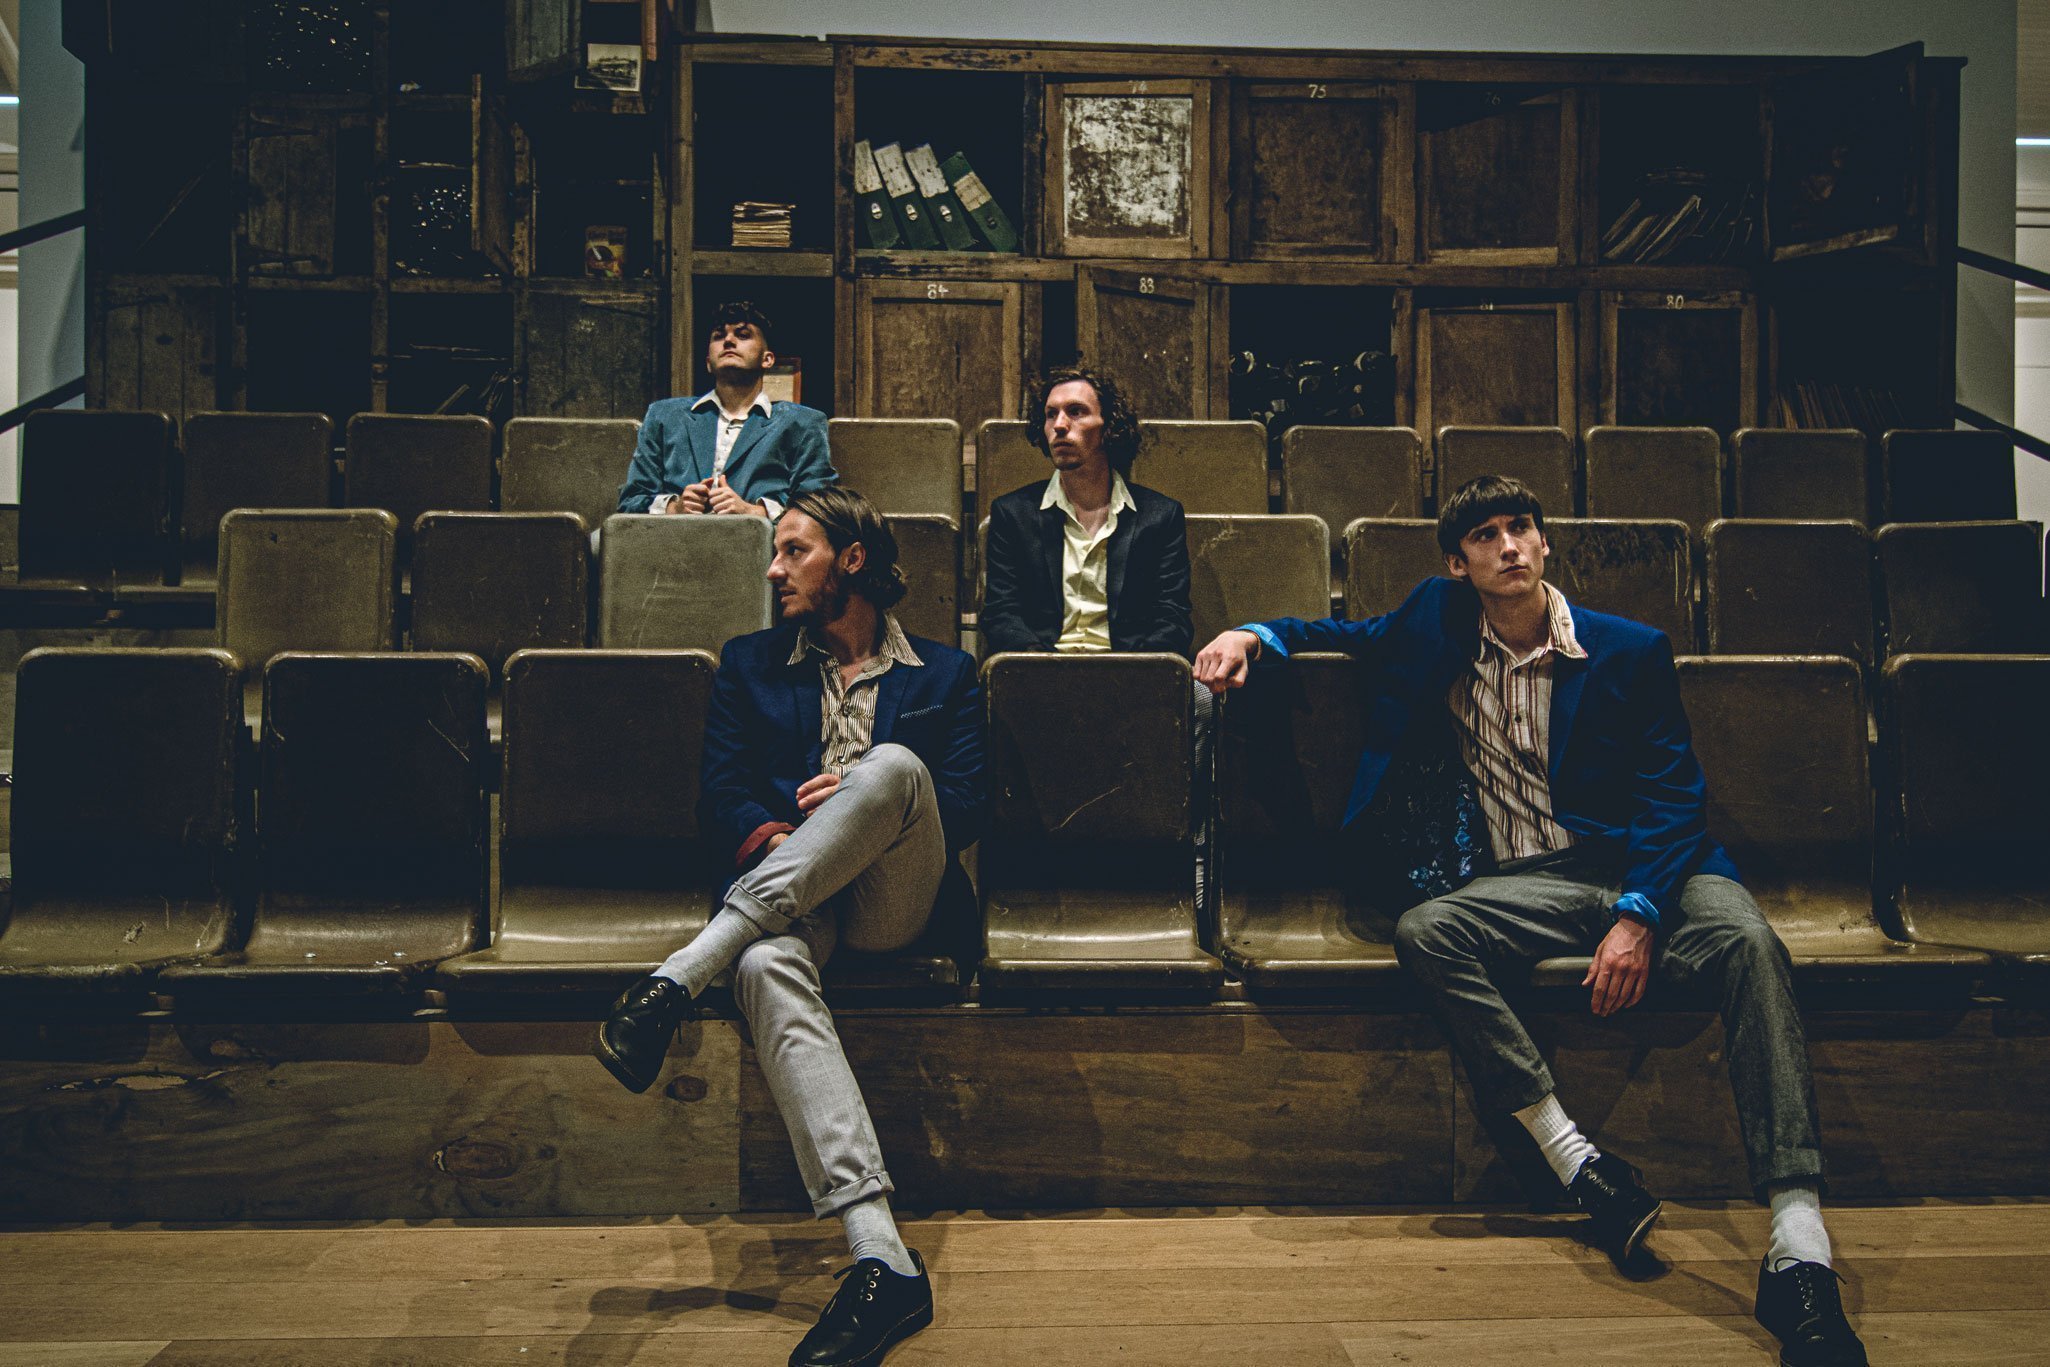 VIDEO PREMIERE: Dantevilles - ‘Confession’ from new EP, ‘Welcome to the Theatre’ – Watch Now 